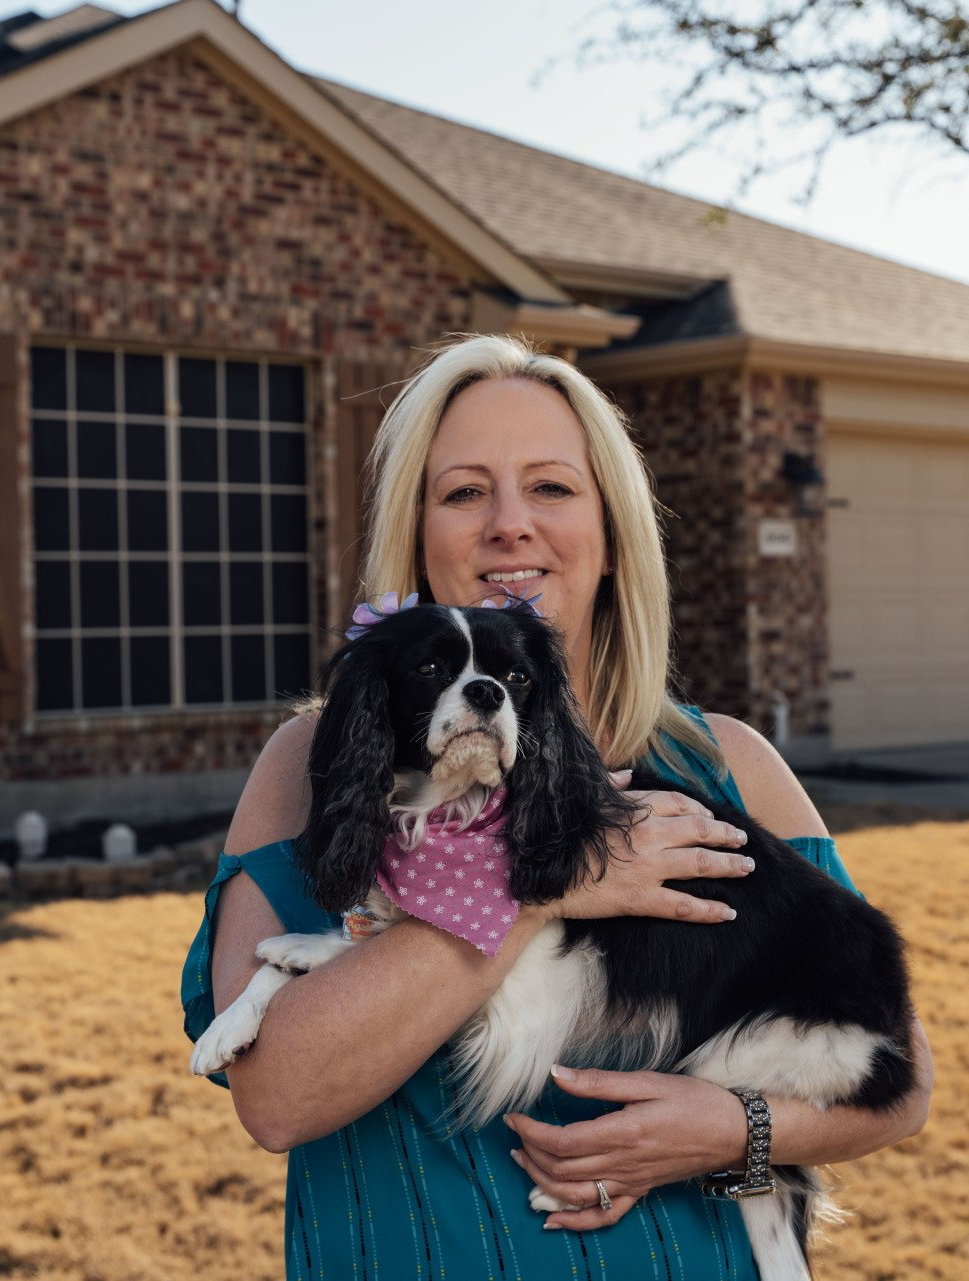 A woman is holding a black and white dog in front of a house.